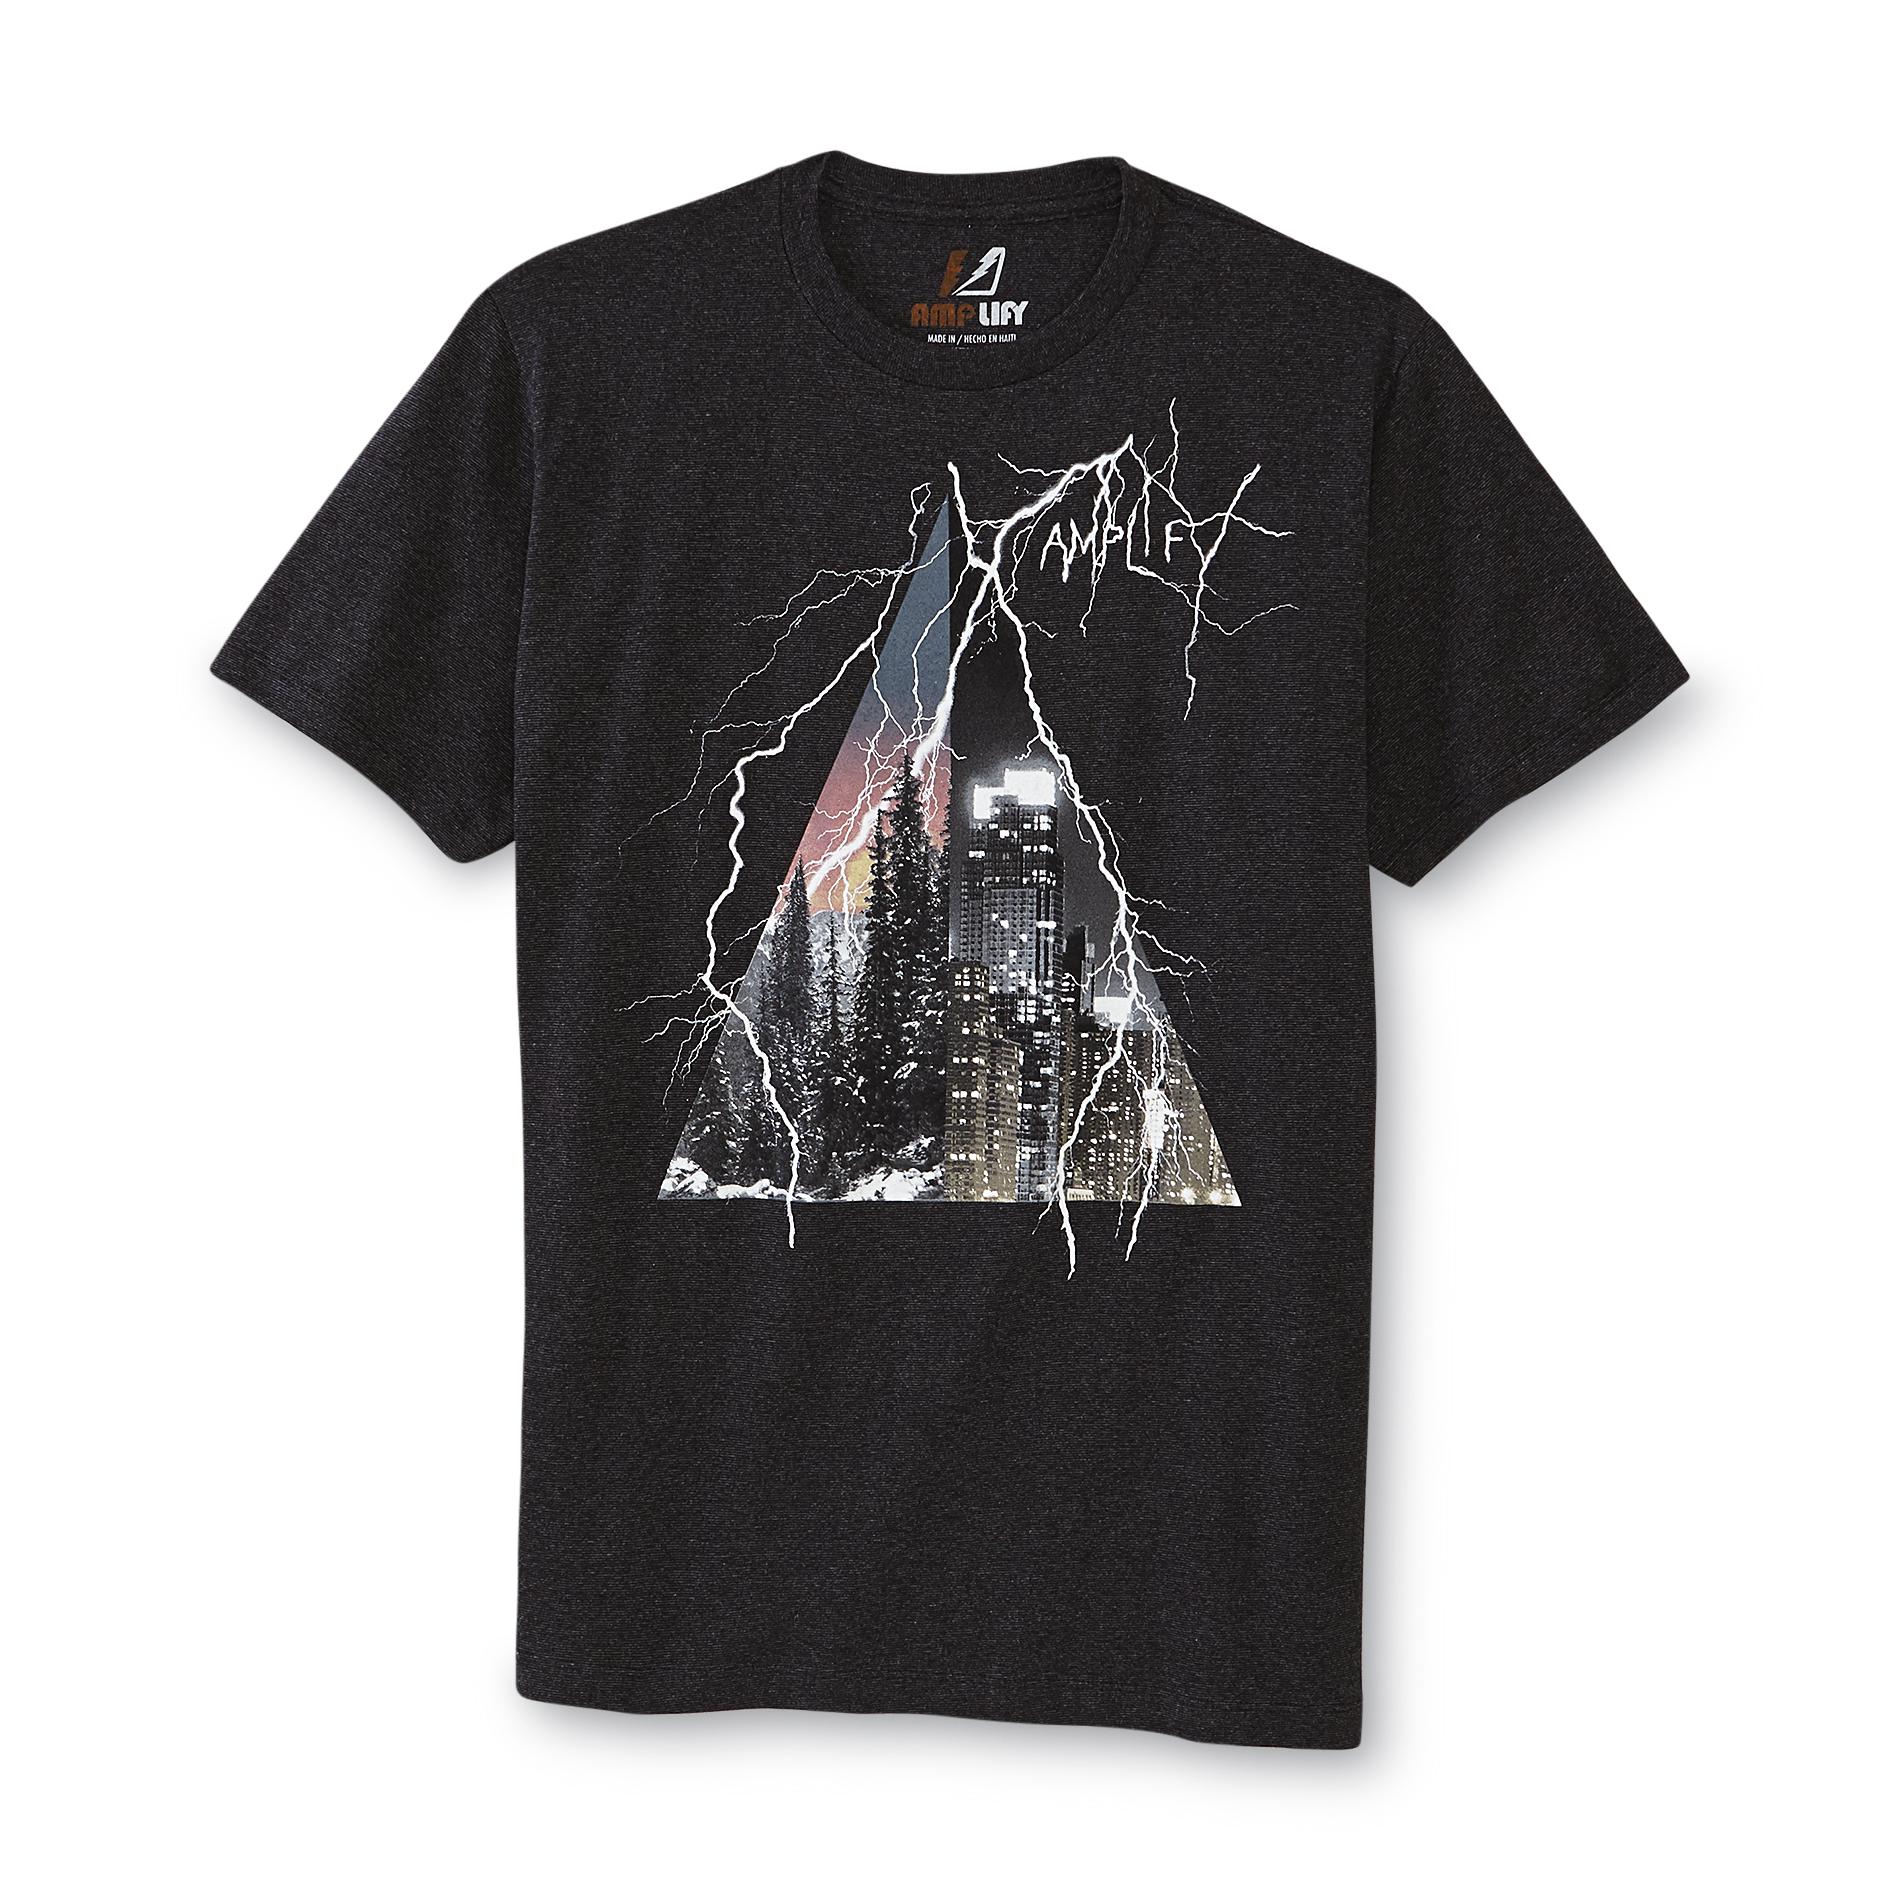 Amplify Young Men's Graphic T-Shirt - Lightning